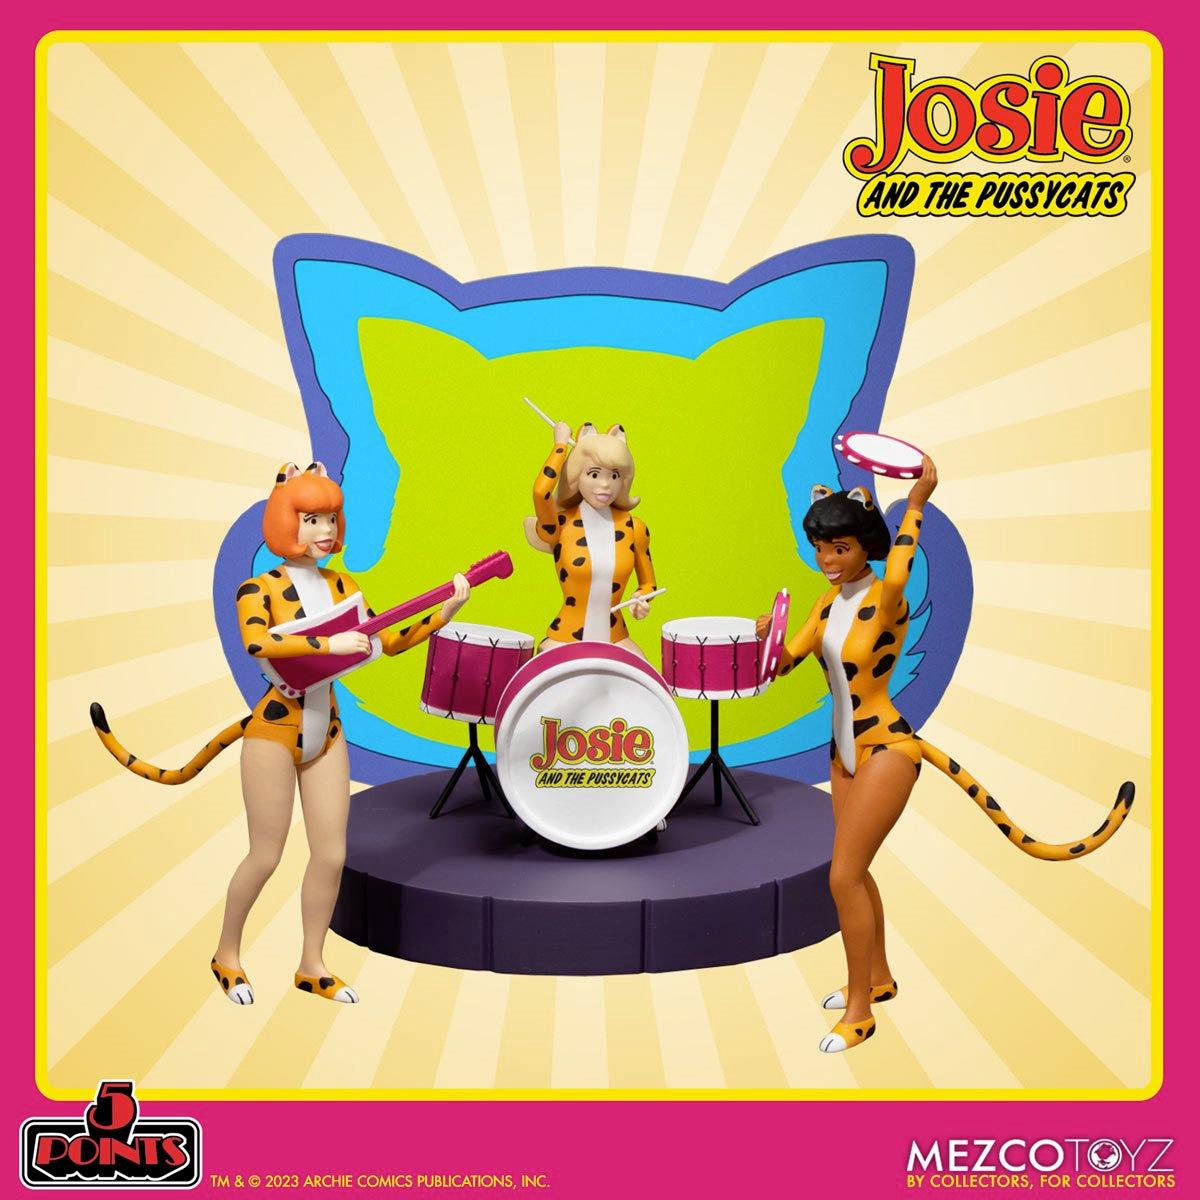 Action Figures Josie and the Pussycats 5 Points Mezco (Archie/Hanna-Barbera)